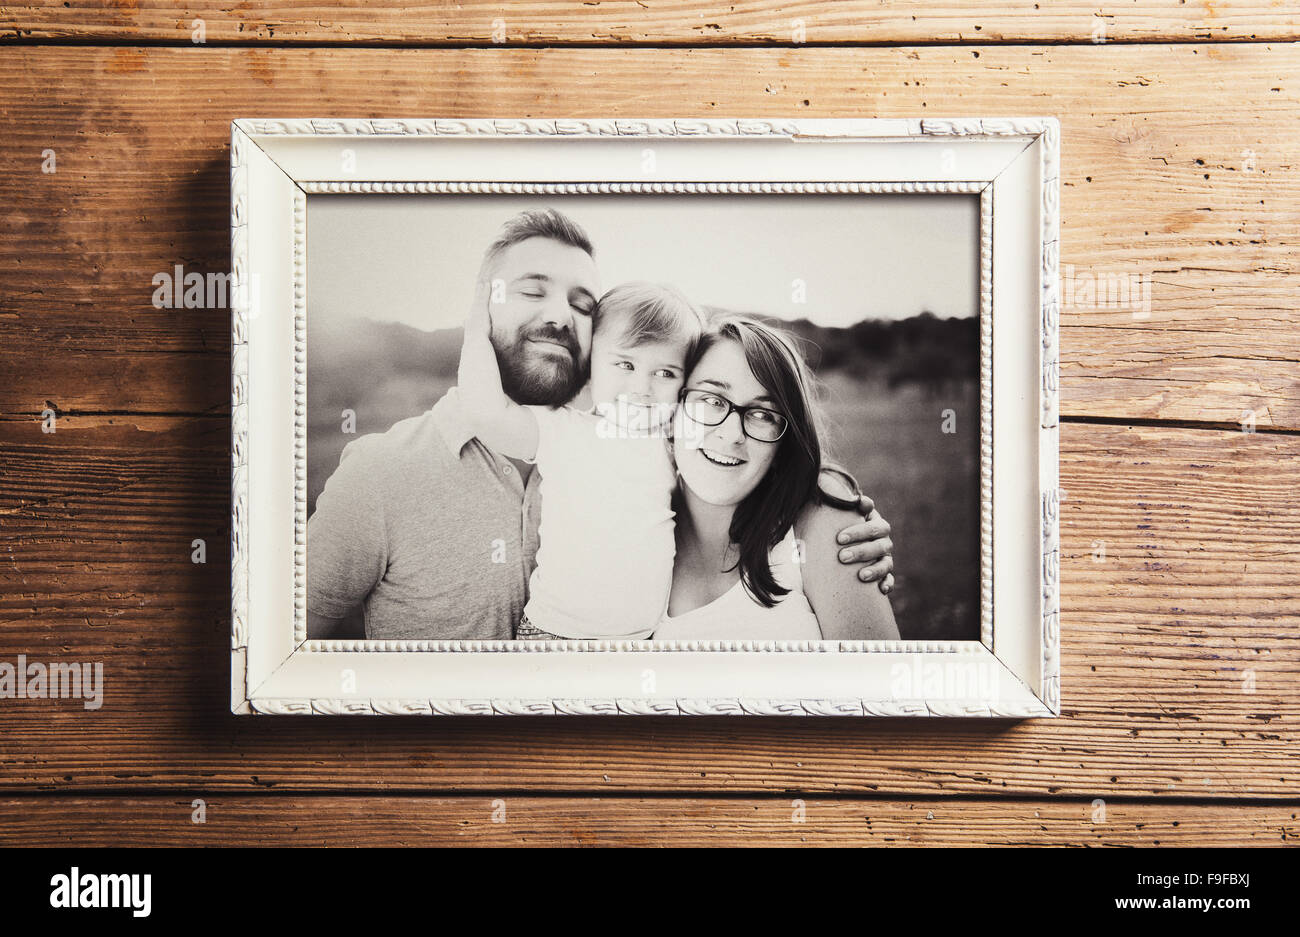 https://c8.alamy.com/comp/F9FBXJ/family-photo-in-white-picture-frame-studio-shot-on-wooden-backgroung-F9FBXJ.jpg